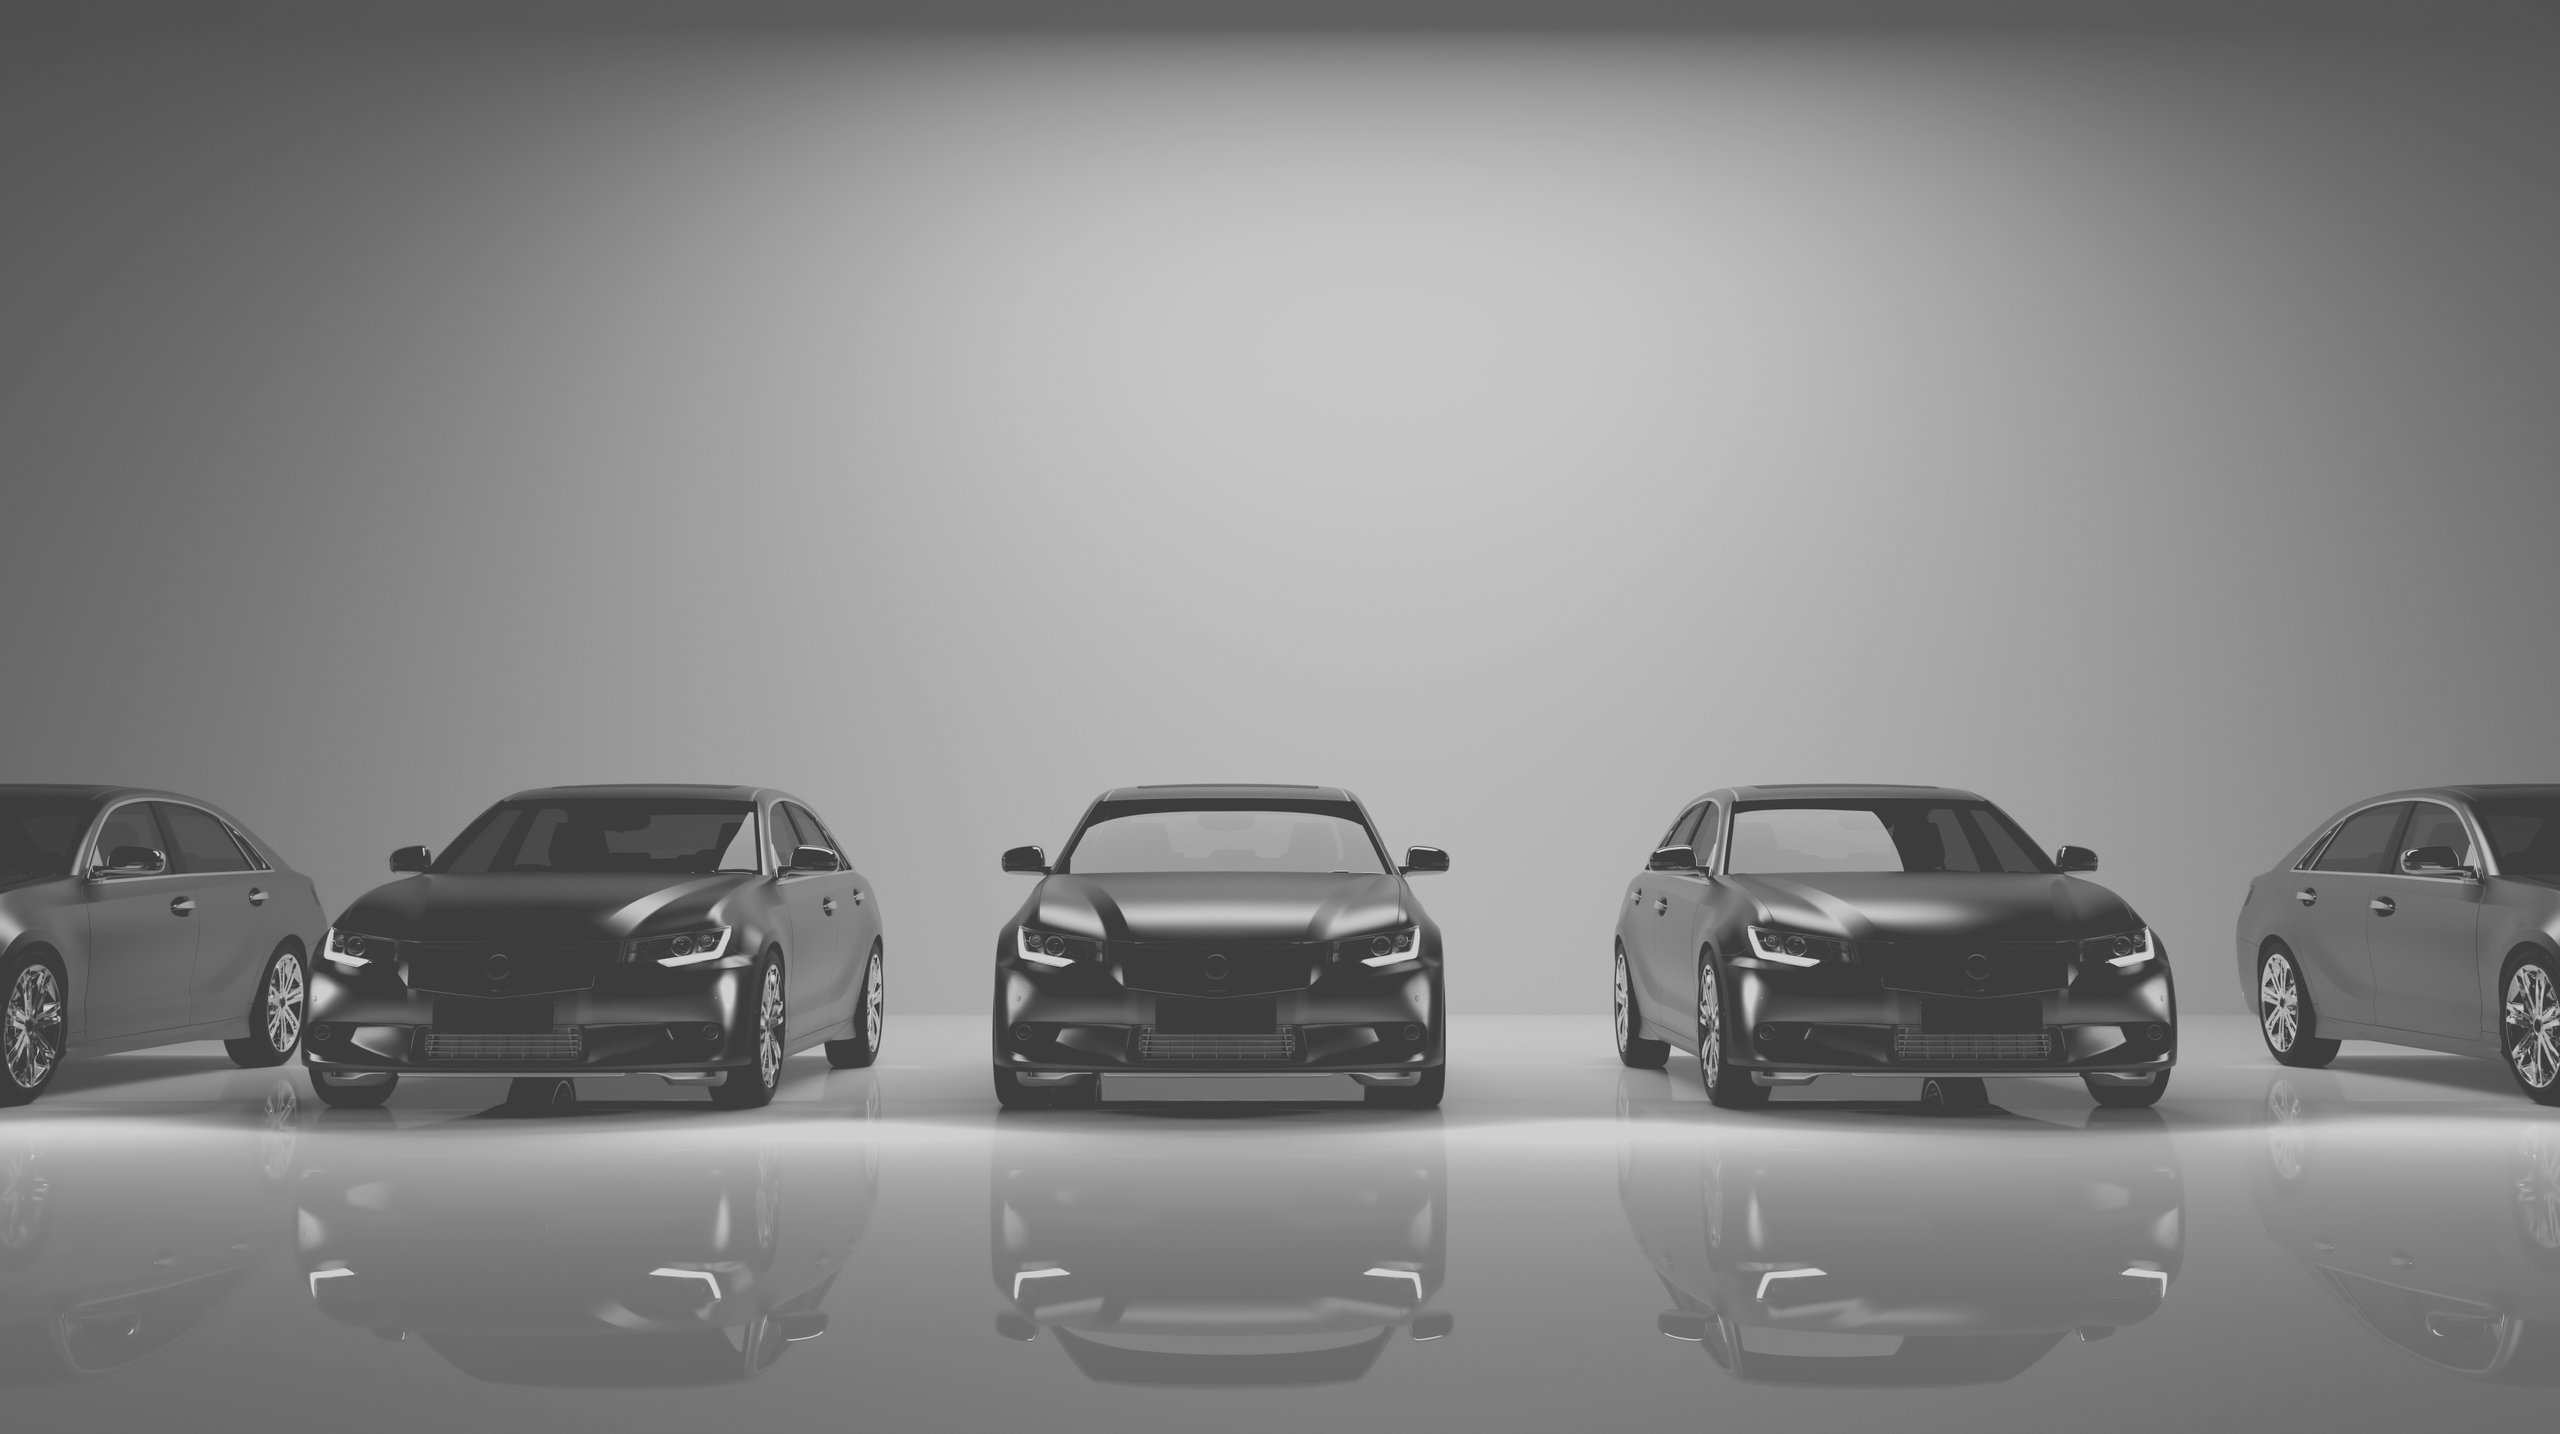 Cars lined up in black and white.